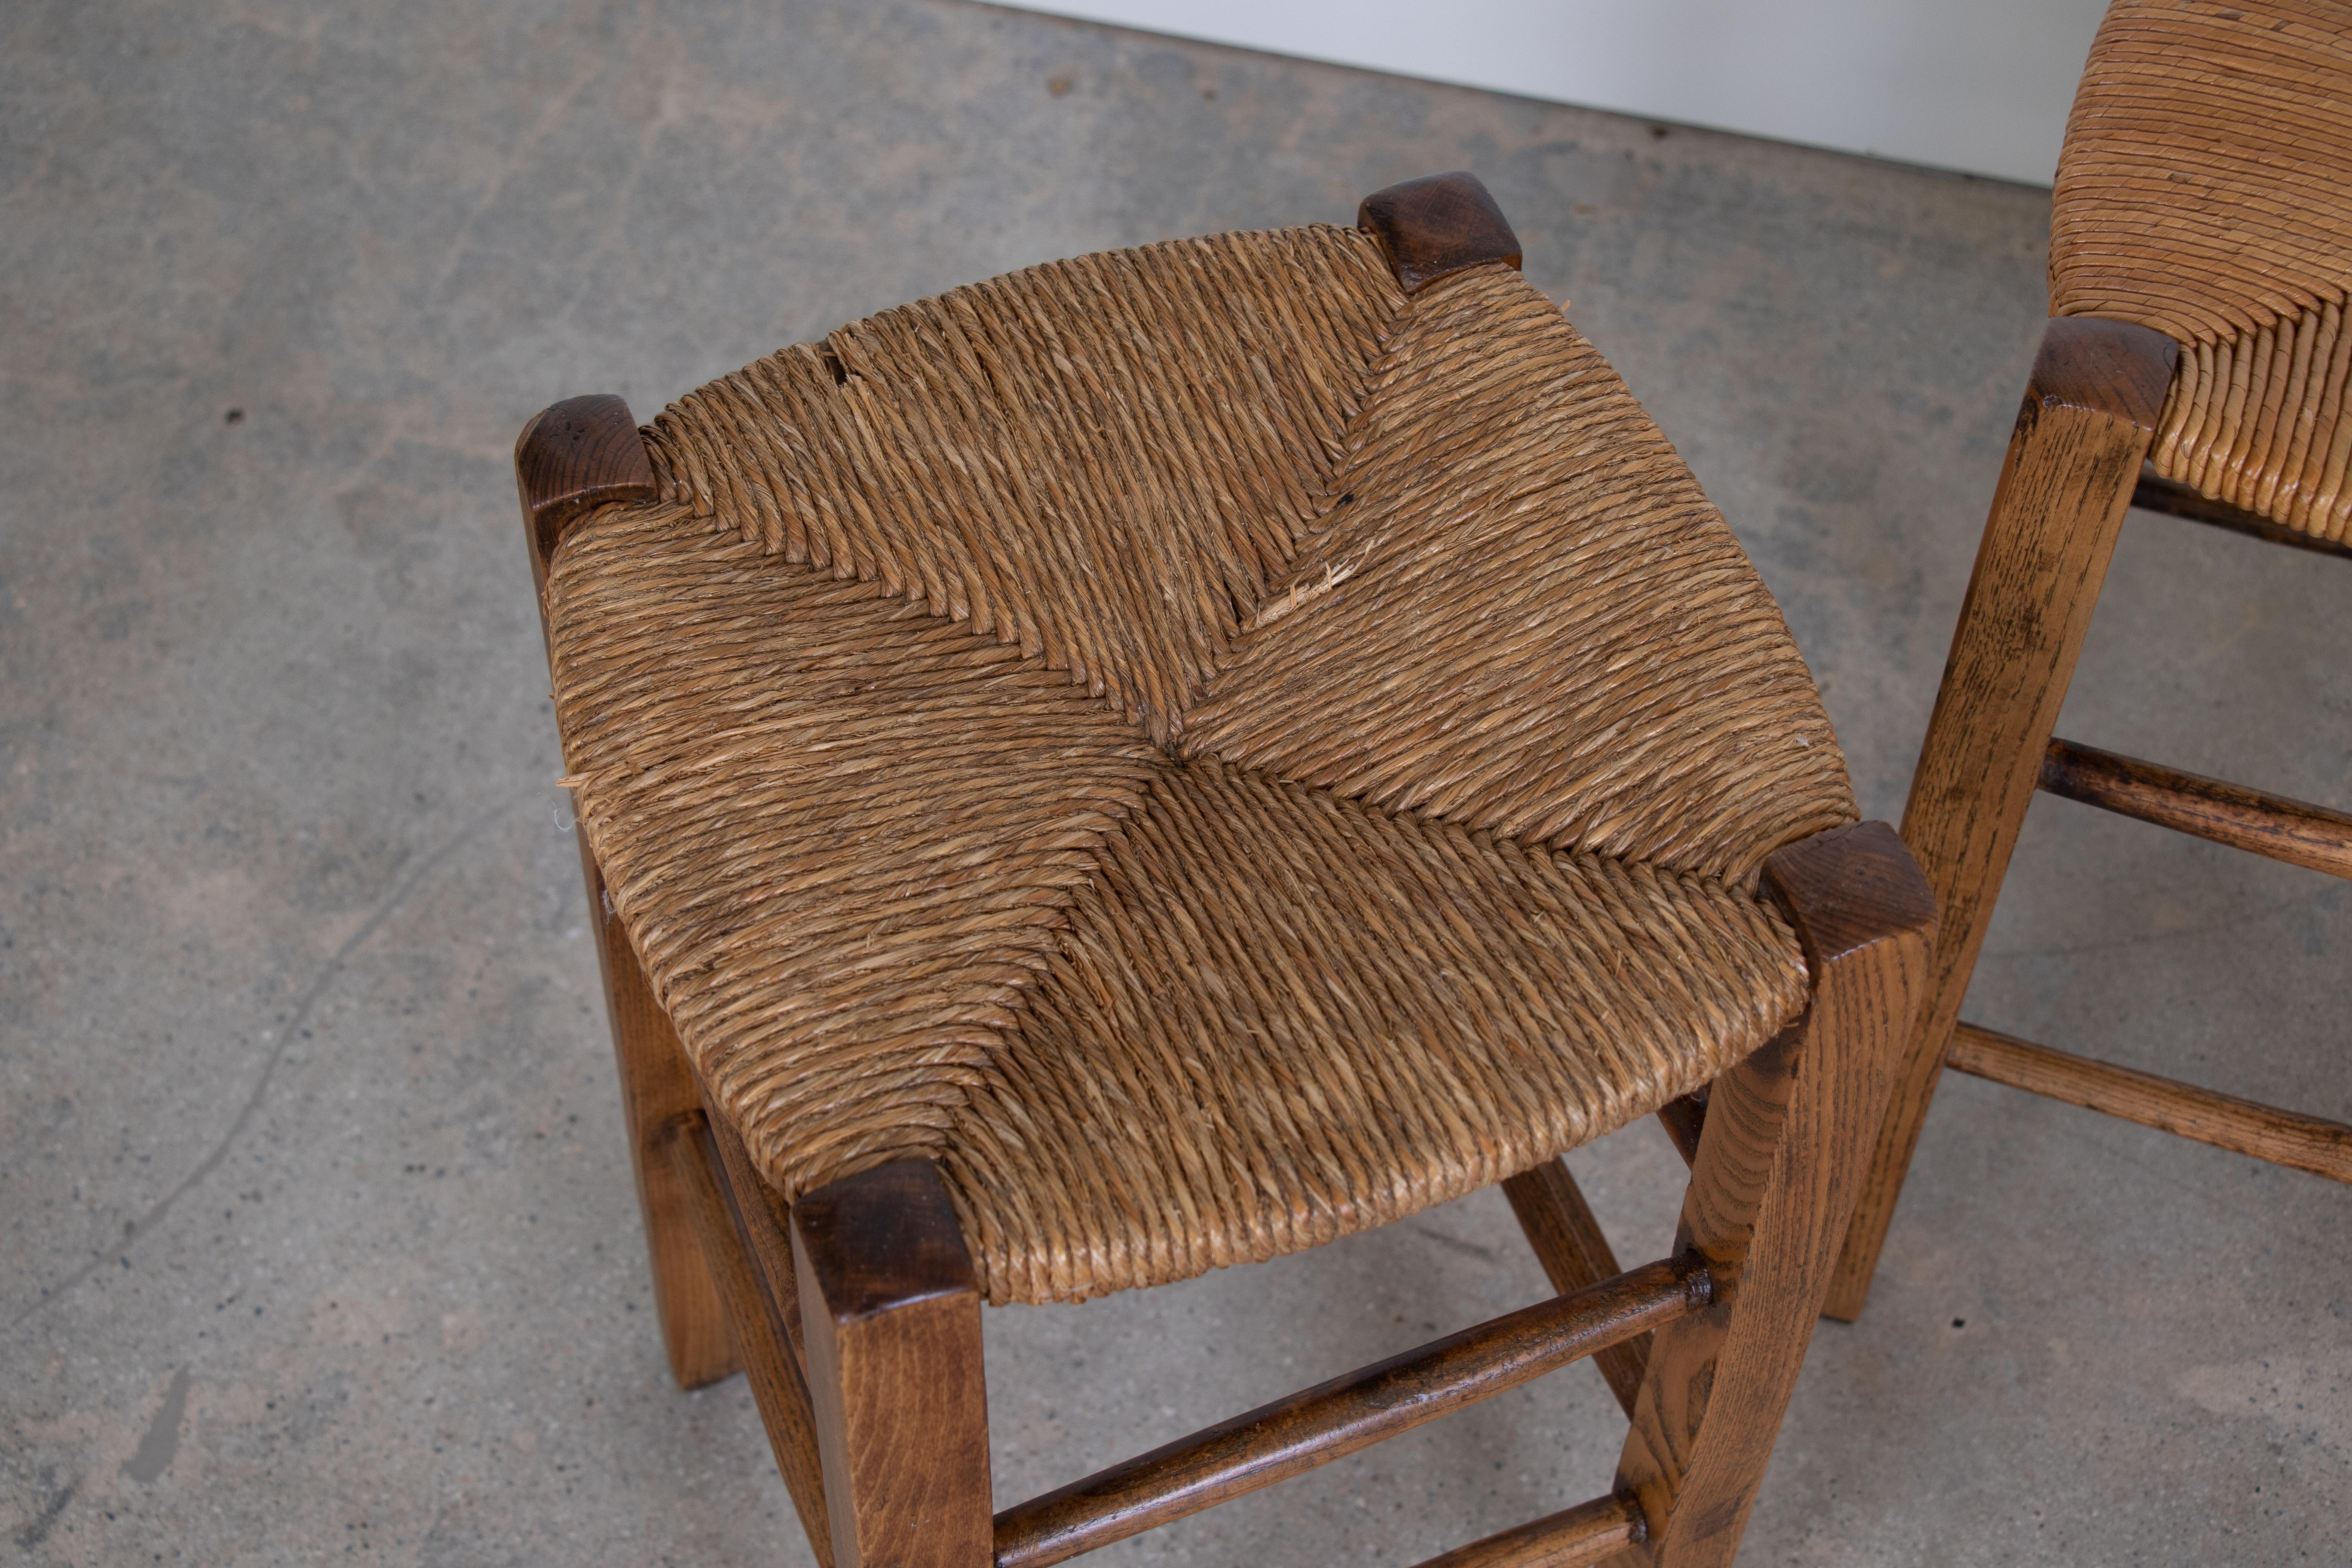 Woven Rush Stools in the Style of Charlotte Perriand